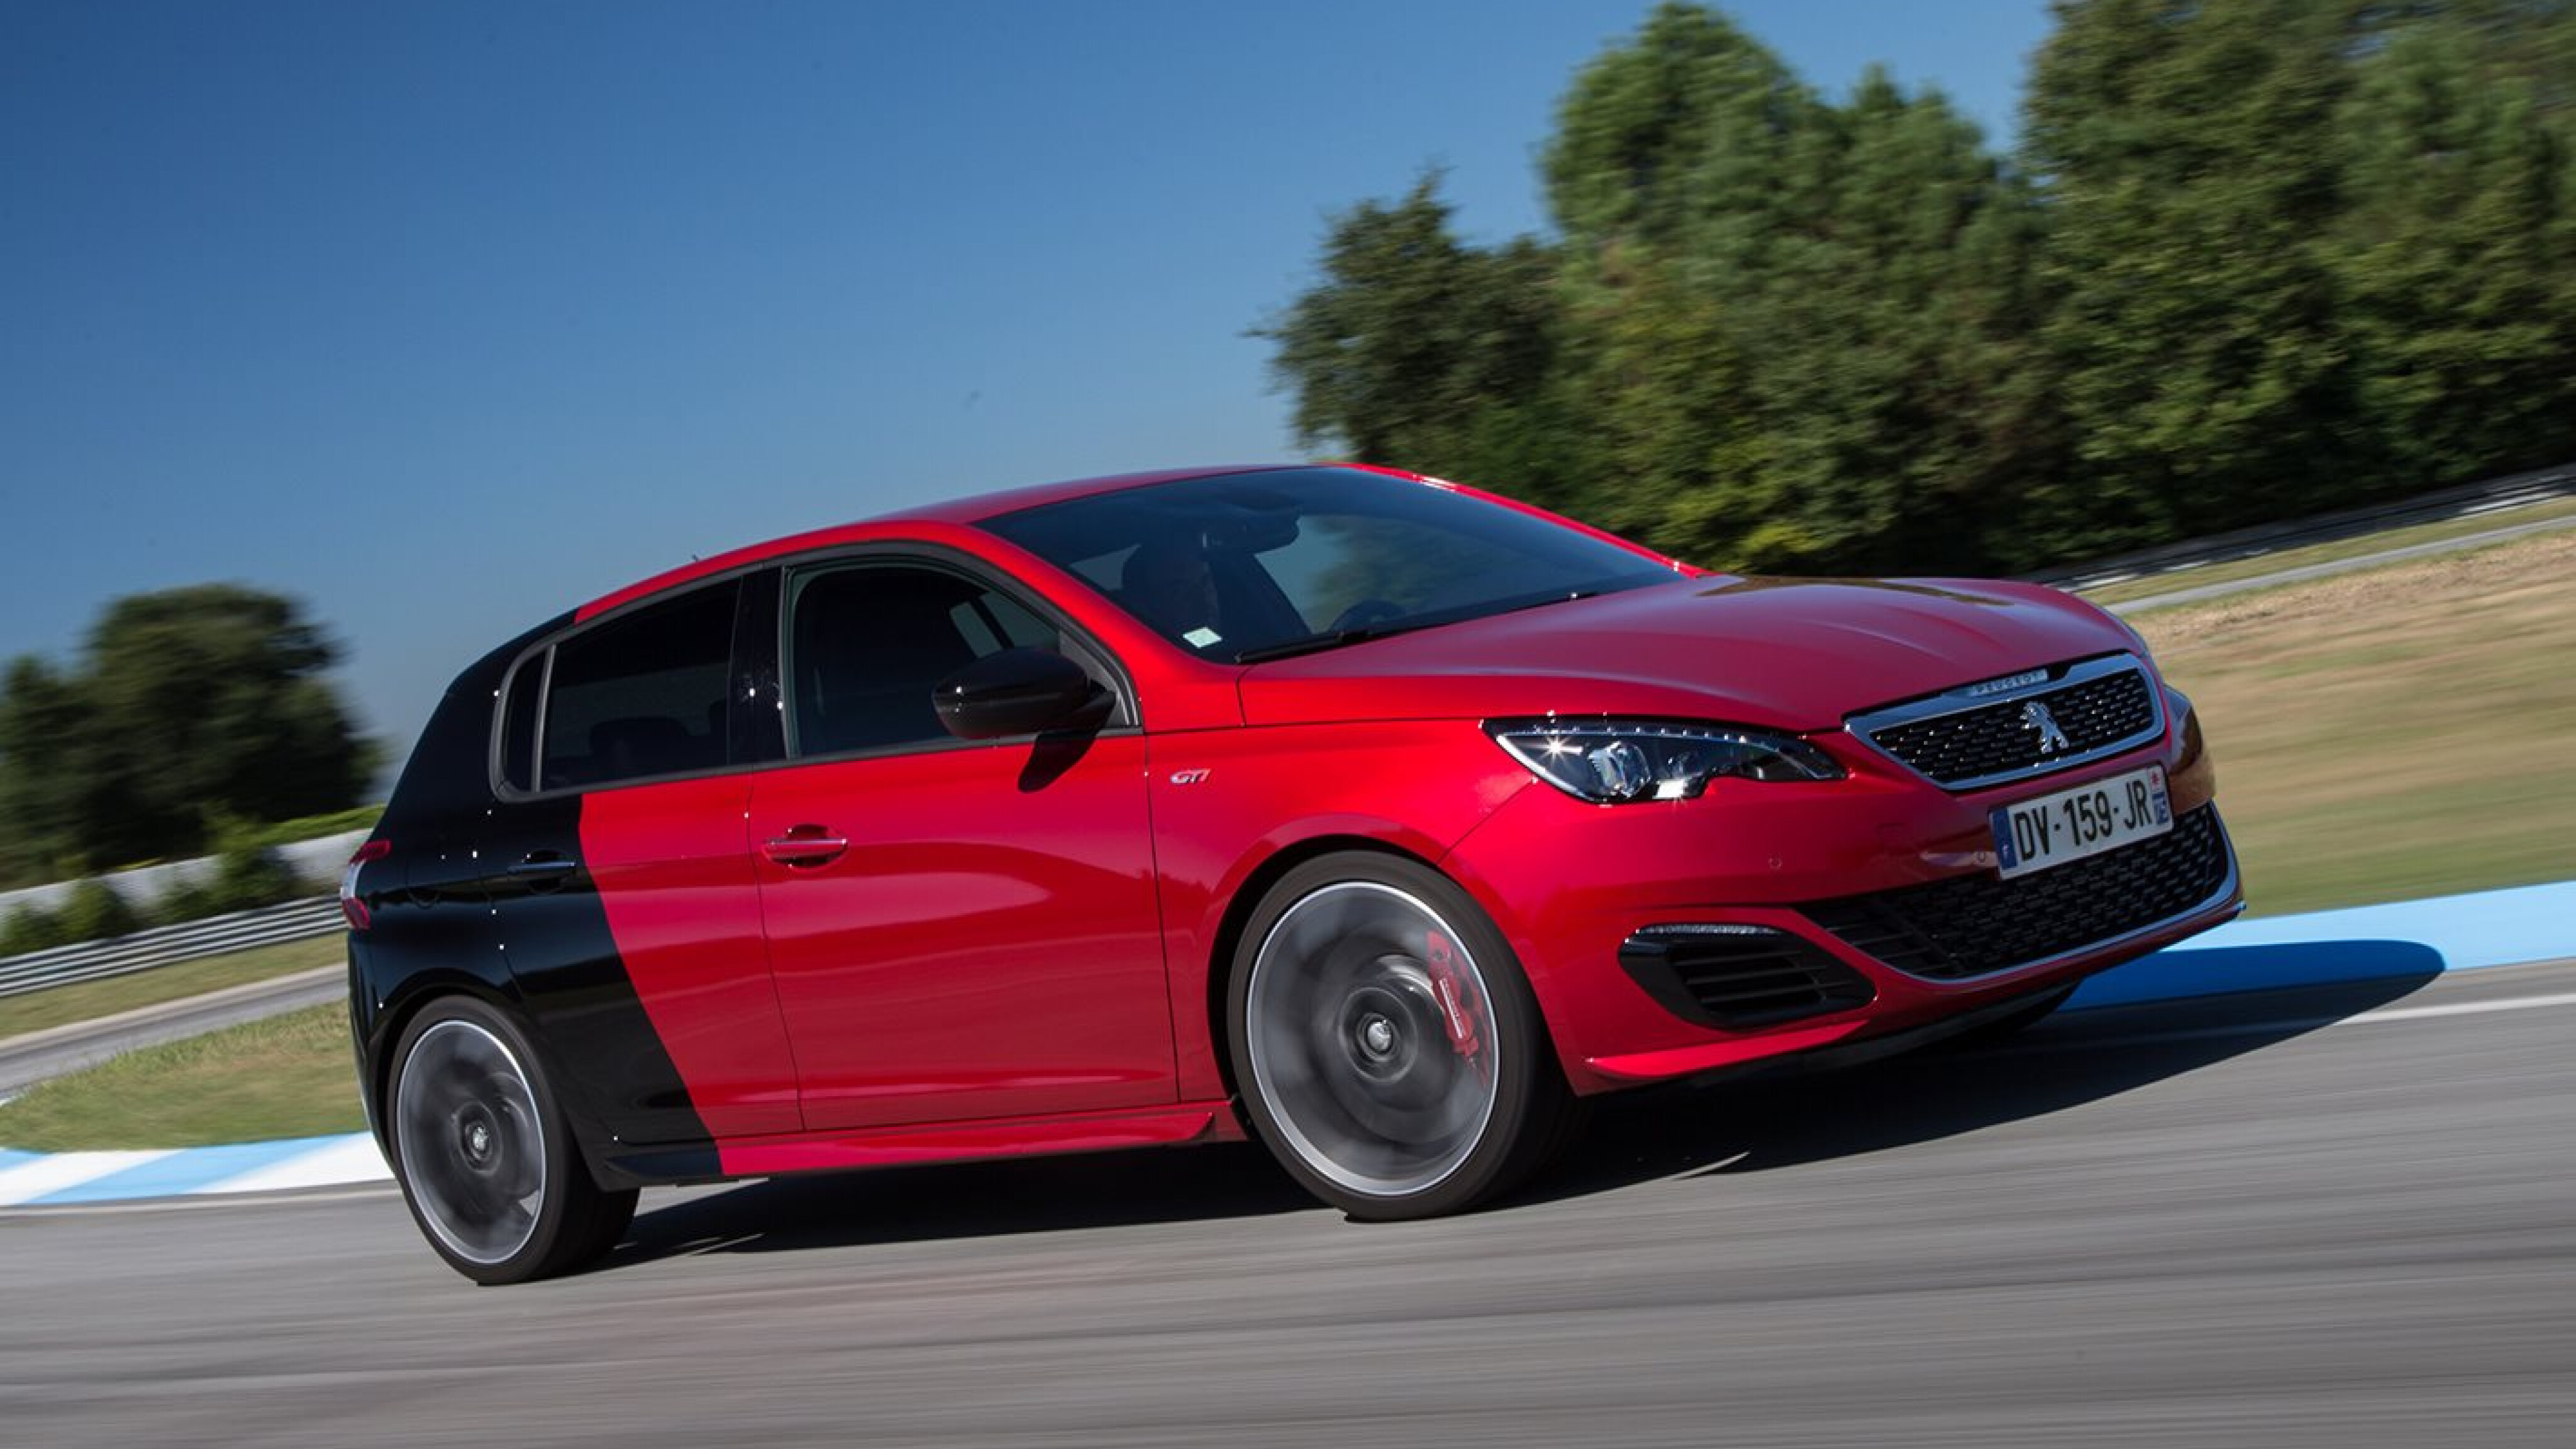 Early Reveal For New Peugeot 308 GTi With Up To 270PS